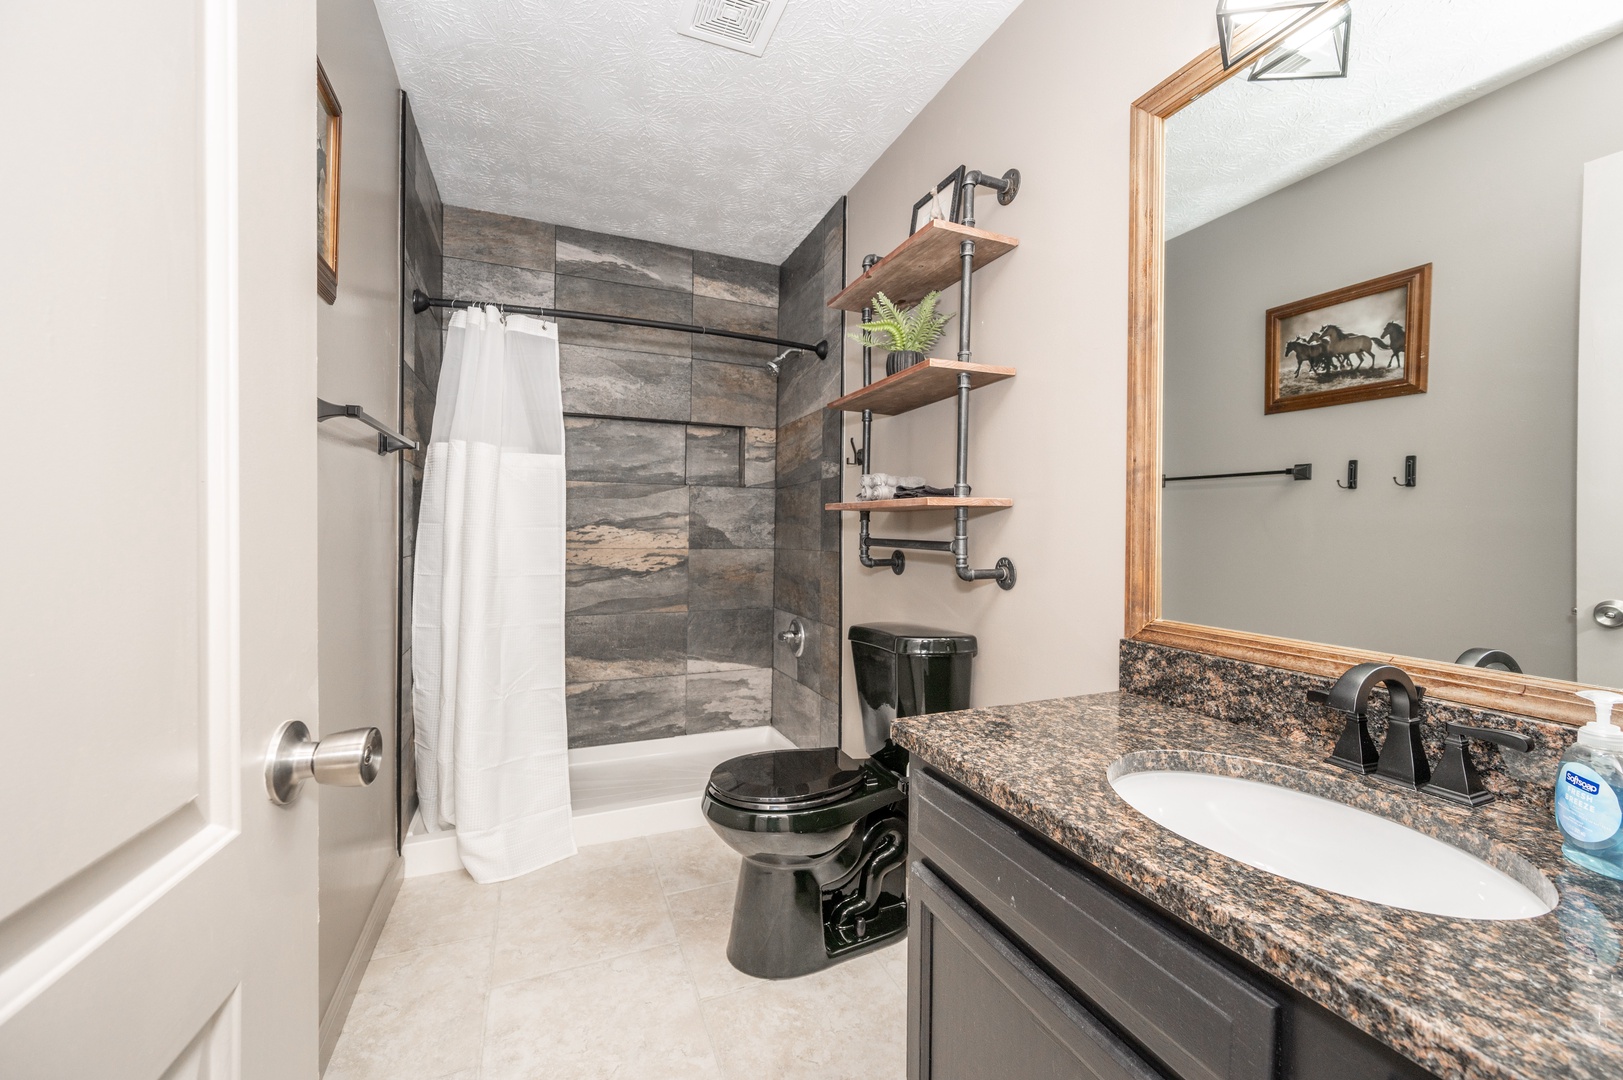 Apartment 2’s stylish full bathroom includes a single vanity & walk-in shower